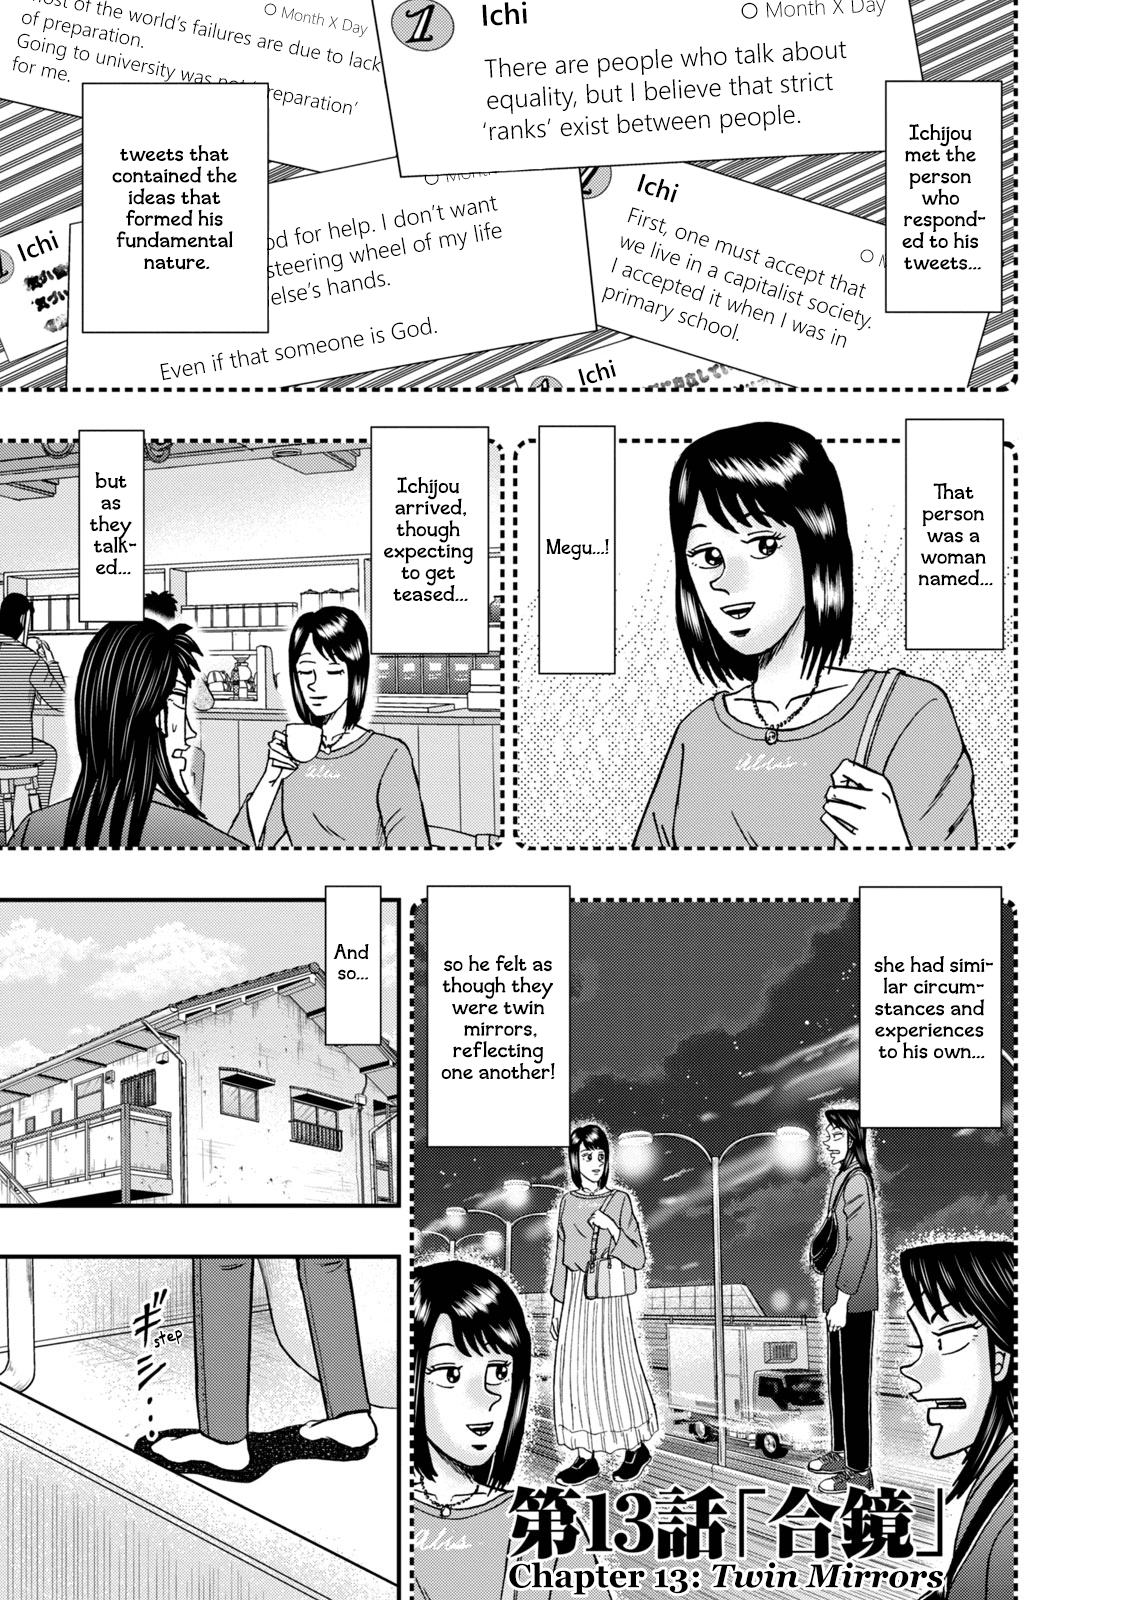 Life In Tokyo Ichijou Vol.2 Chapter 13: Twin Mirrors - Picture 1